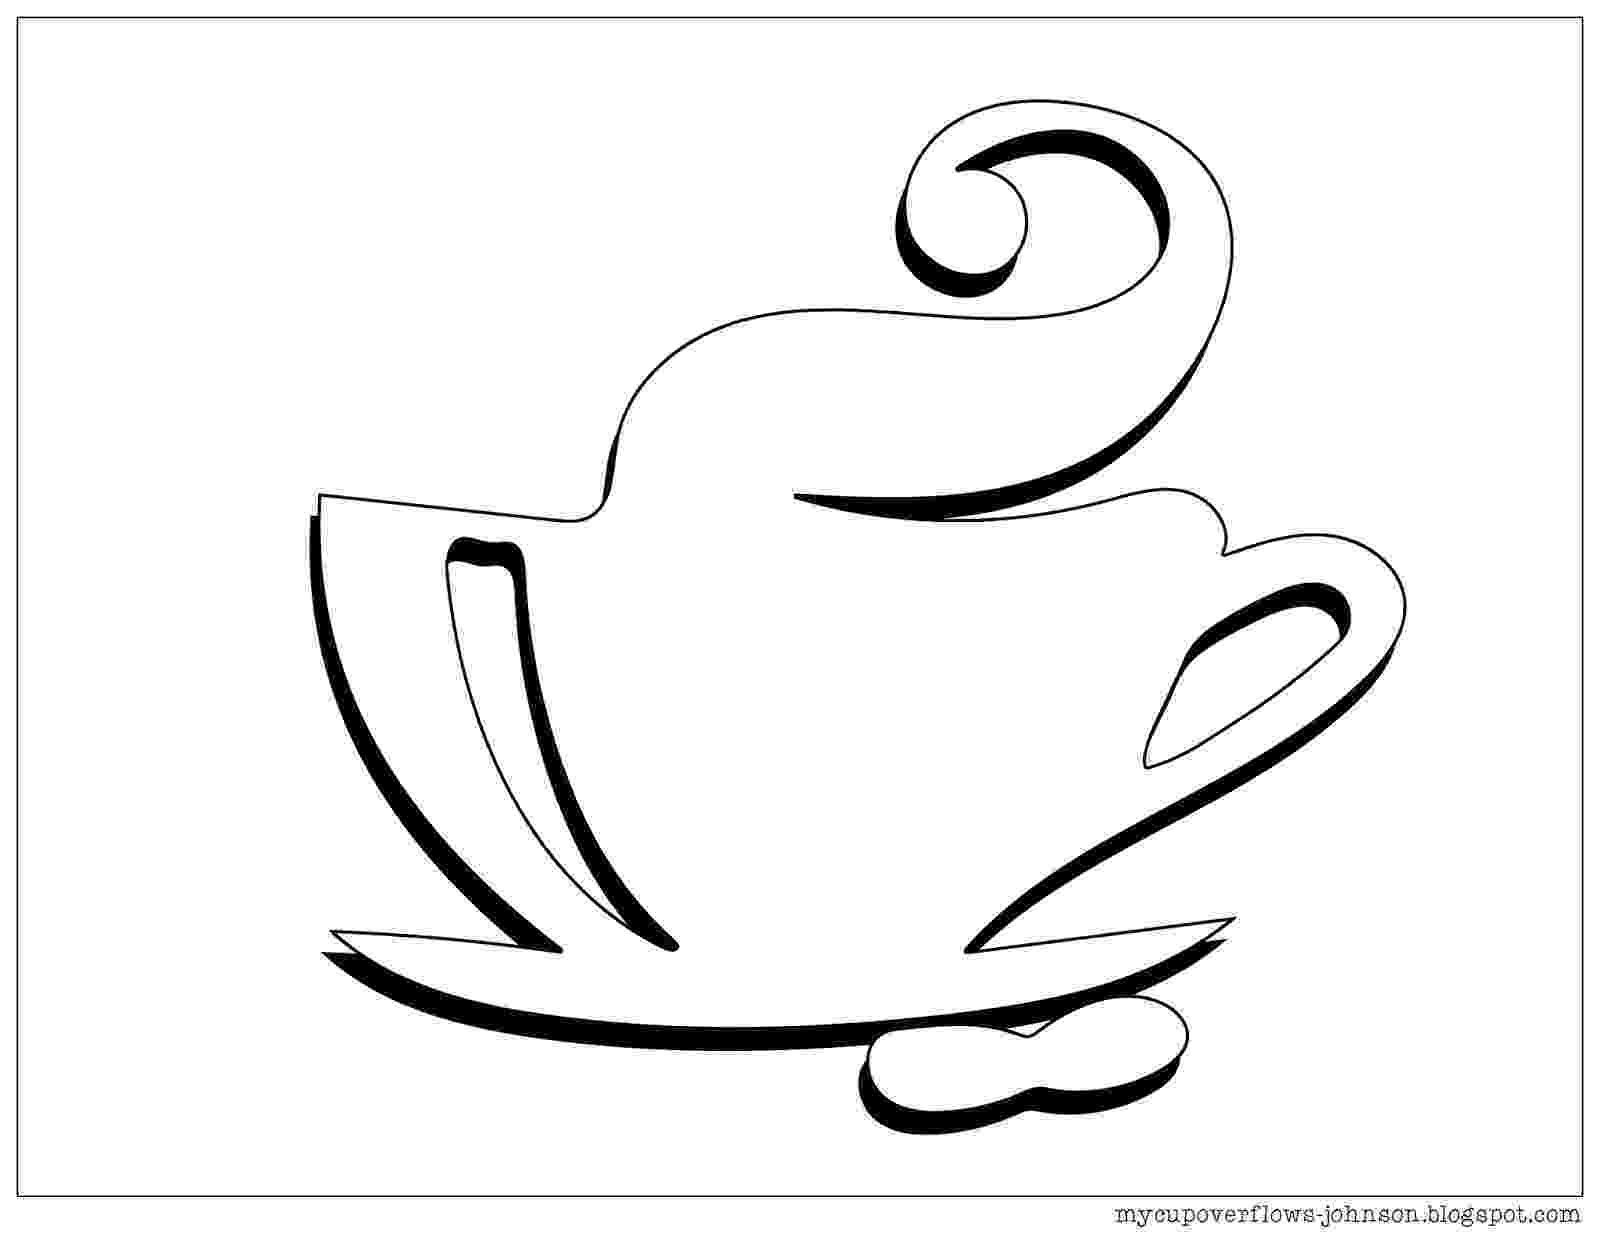 cup coloring page cup coloring pages to download and print for free page coloring cup 